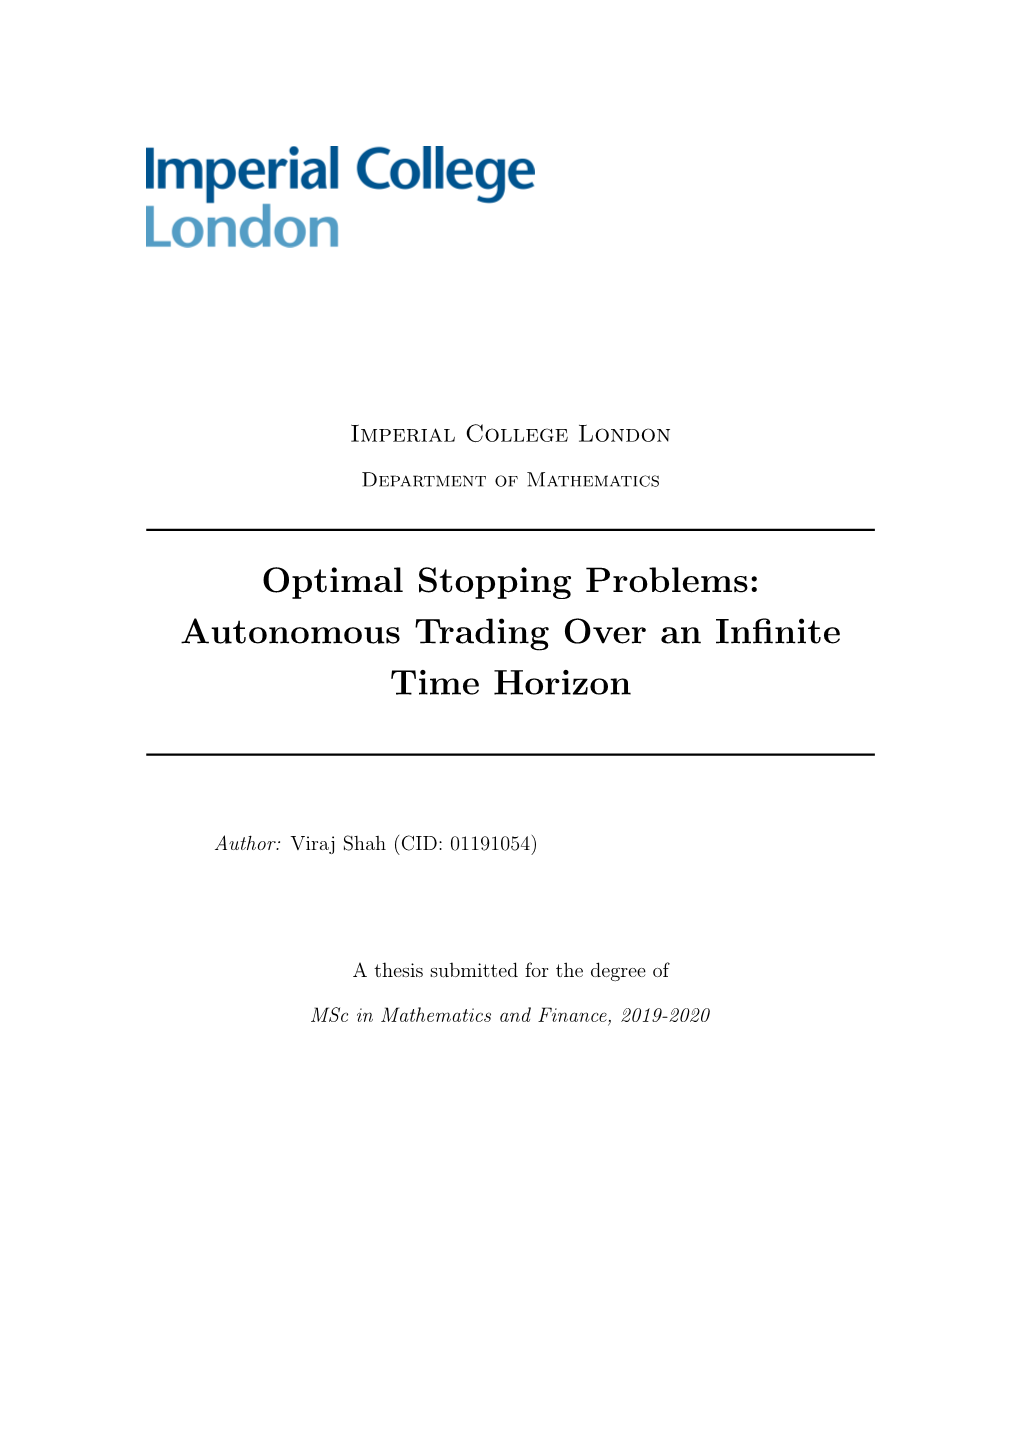 Optimal Stopping Problems: Autonomous Trading Over an Inﬁnite Time Horizon